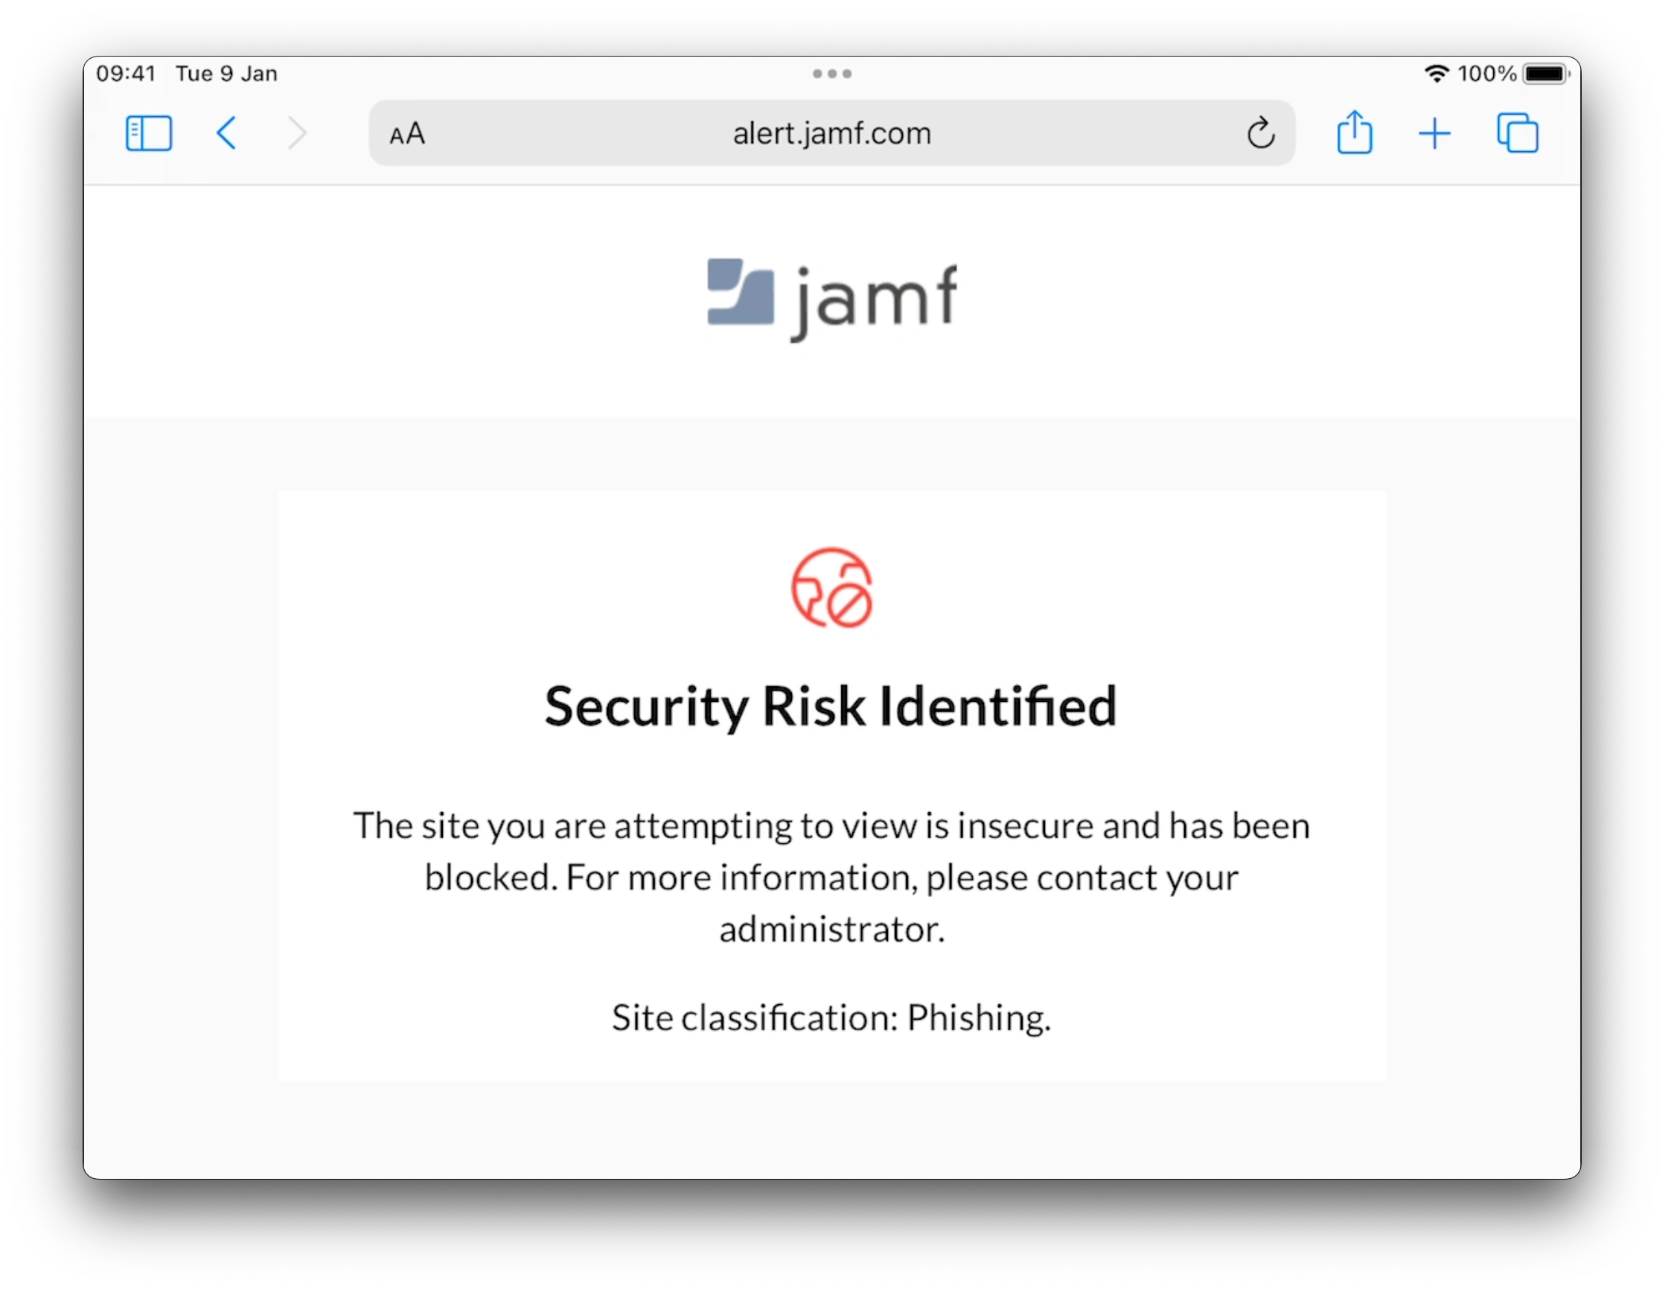 Block screen reads: [Jamf logo] Security Risk Identified The site you are attempting to view is insecure and has been blocked. For more information, please contact your administrator. Site classification: Phishing.